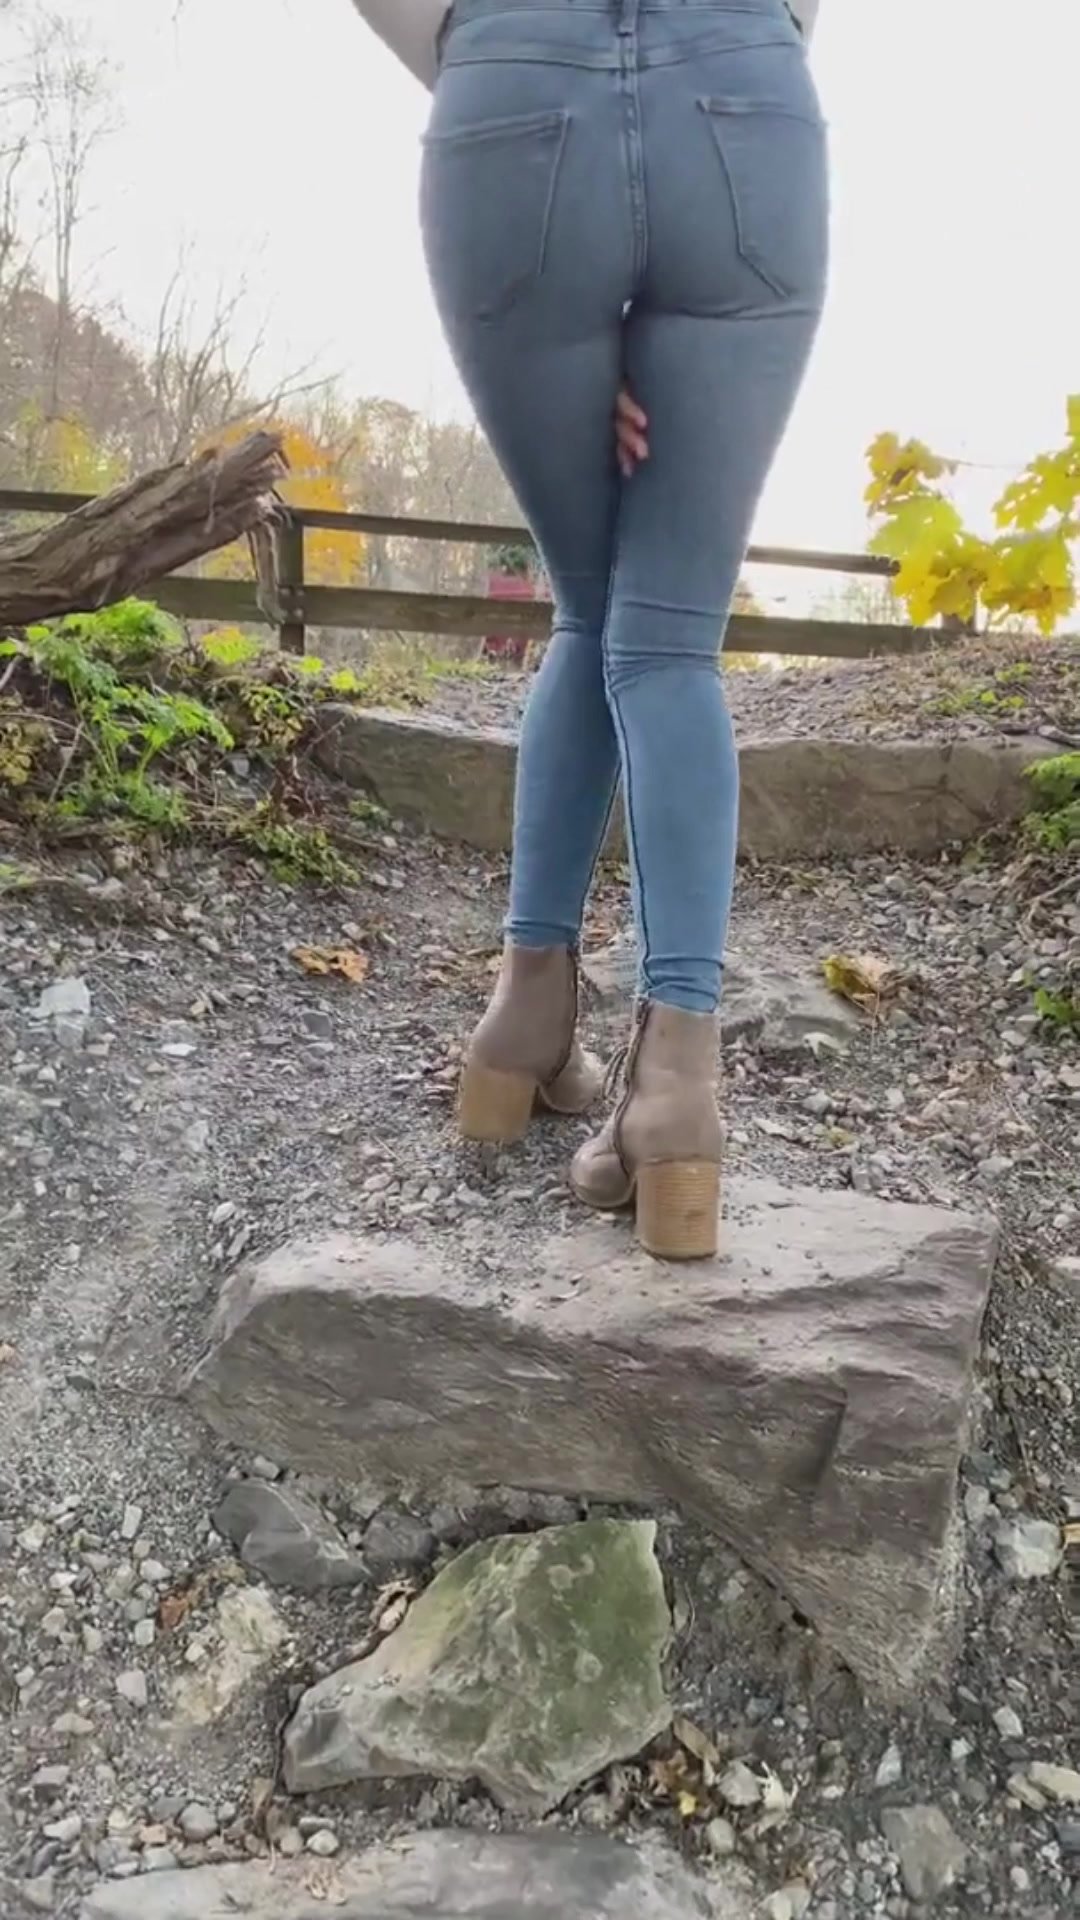 Girl wets her jeans on a rock